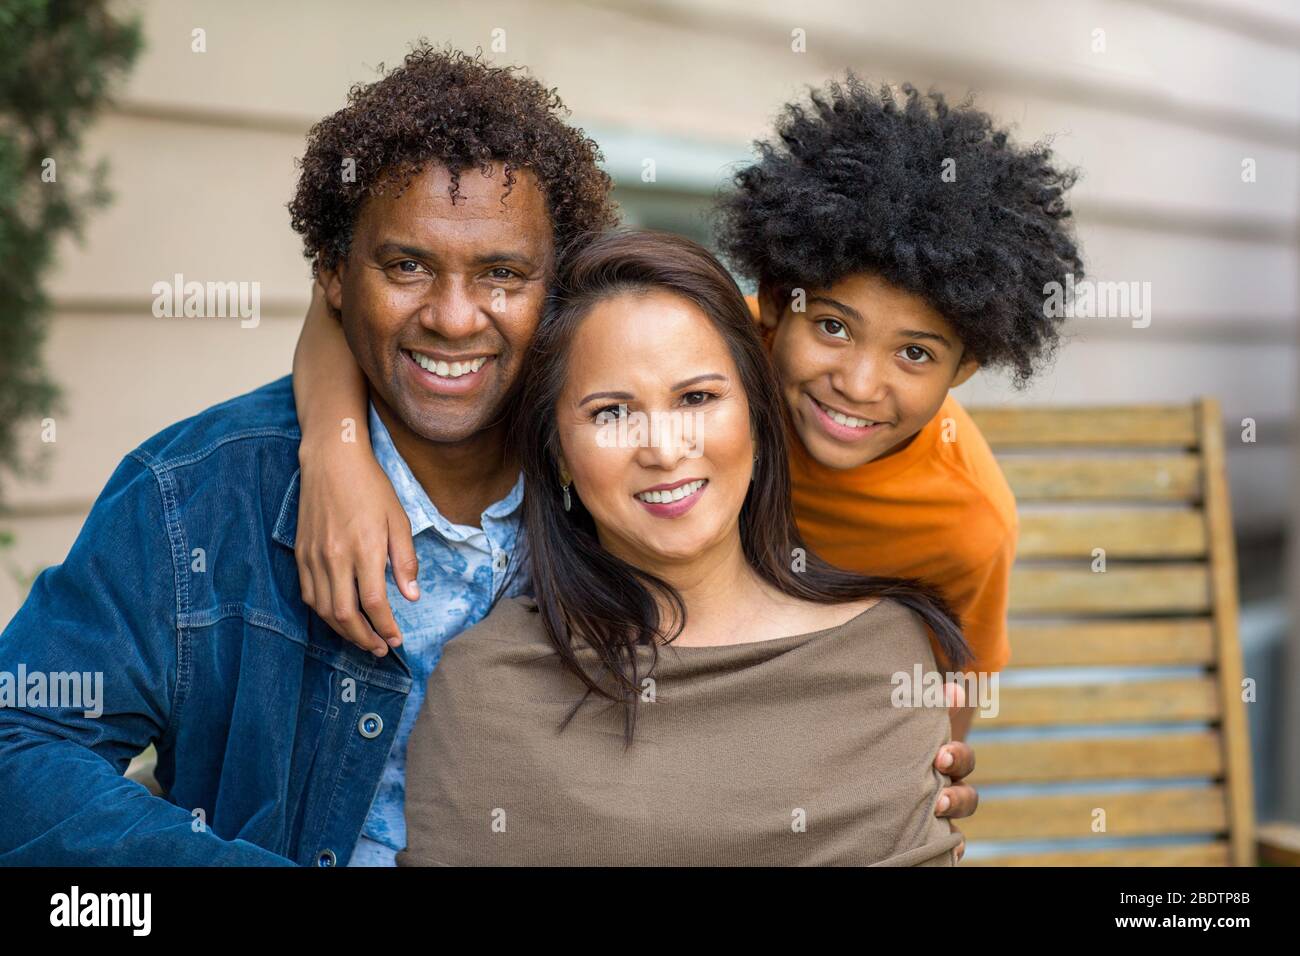 Portrait of a mixed race family smiling. Stock Photo